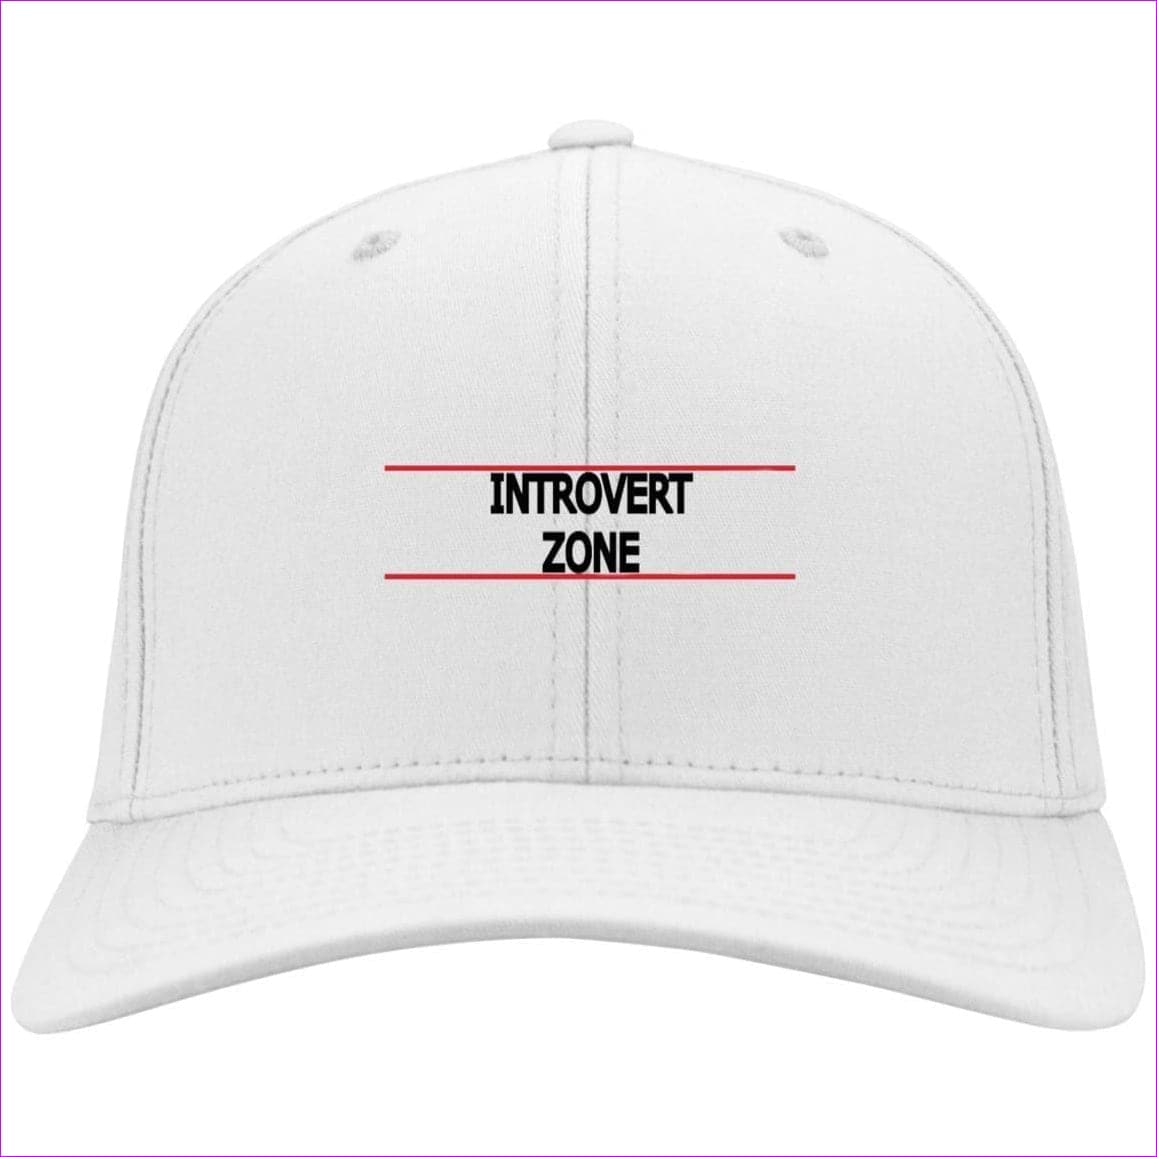 C813 Flex Fit Twill Baseball Cap White - Introvert Zone Embroidered Knit Cap, Cap, Beanie - Hat at TFC&H Co.